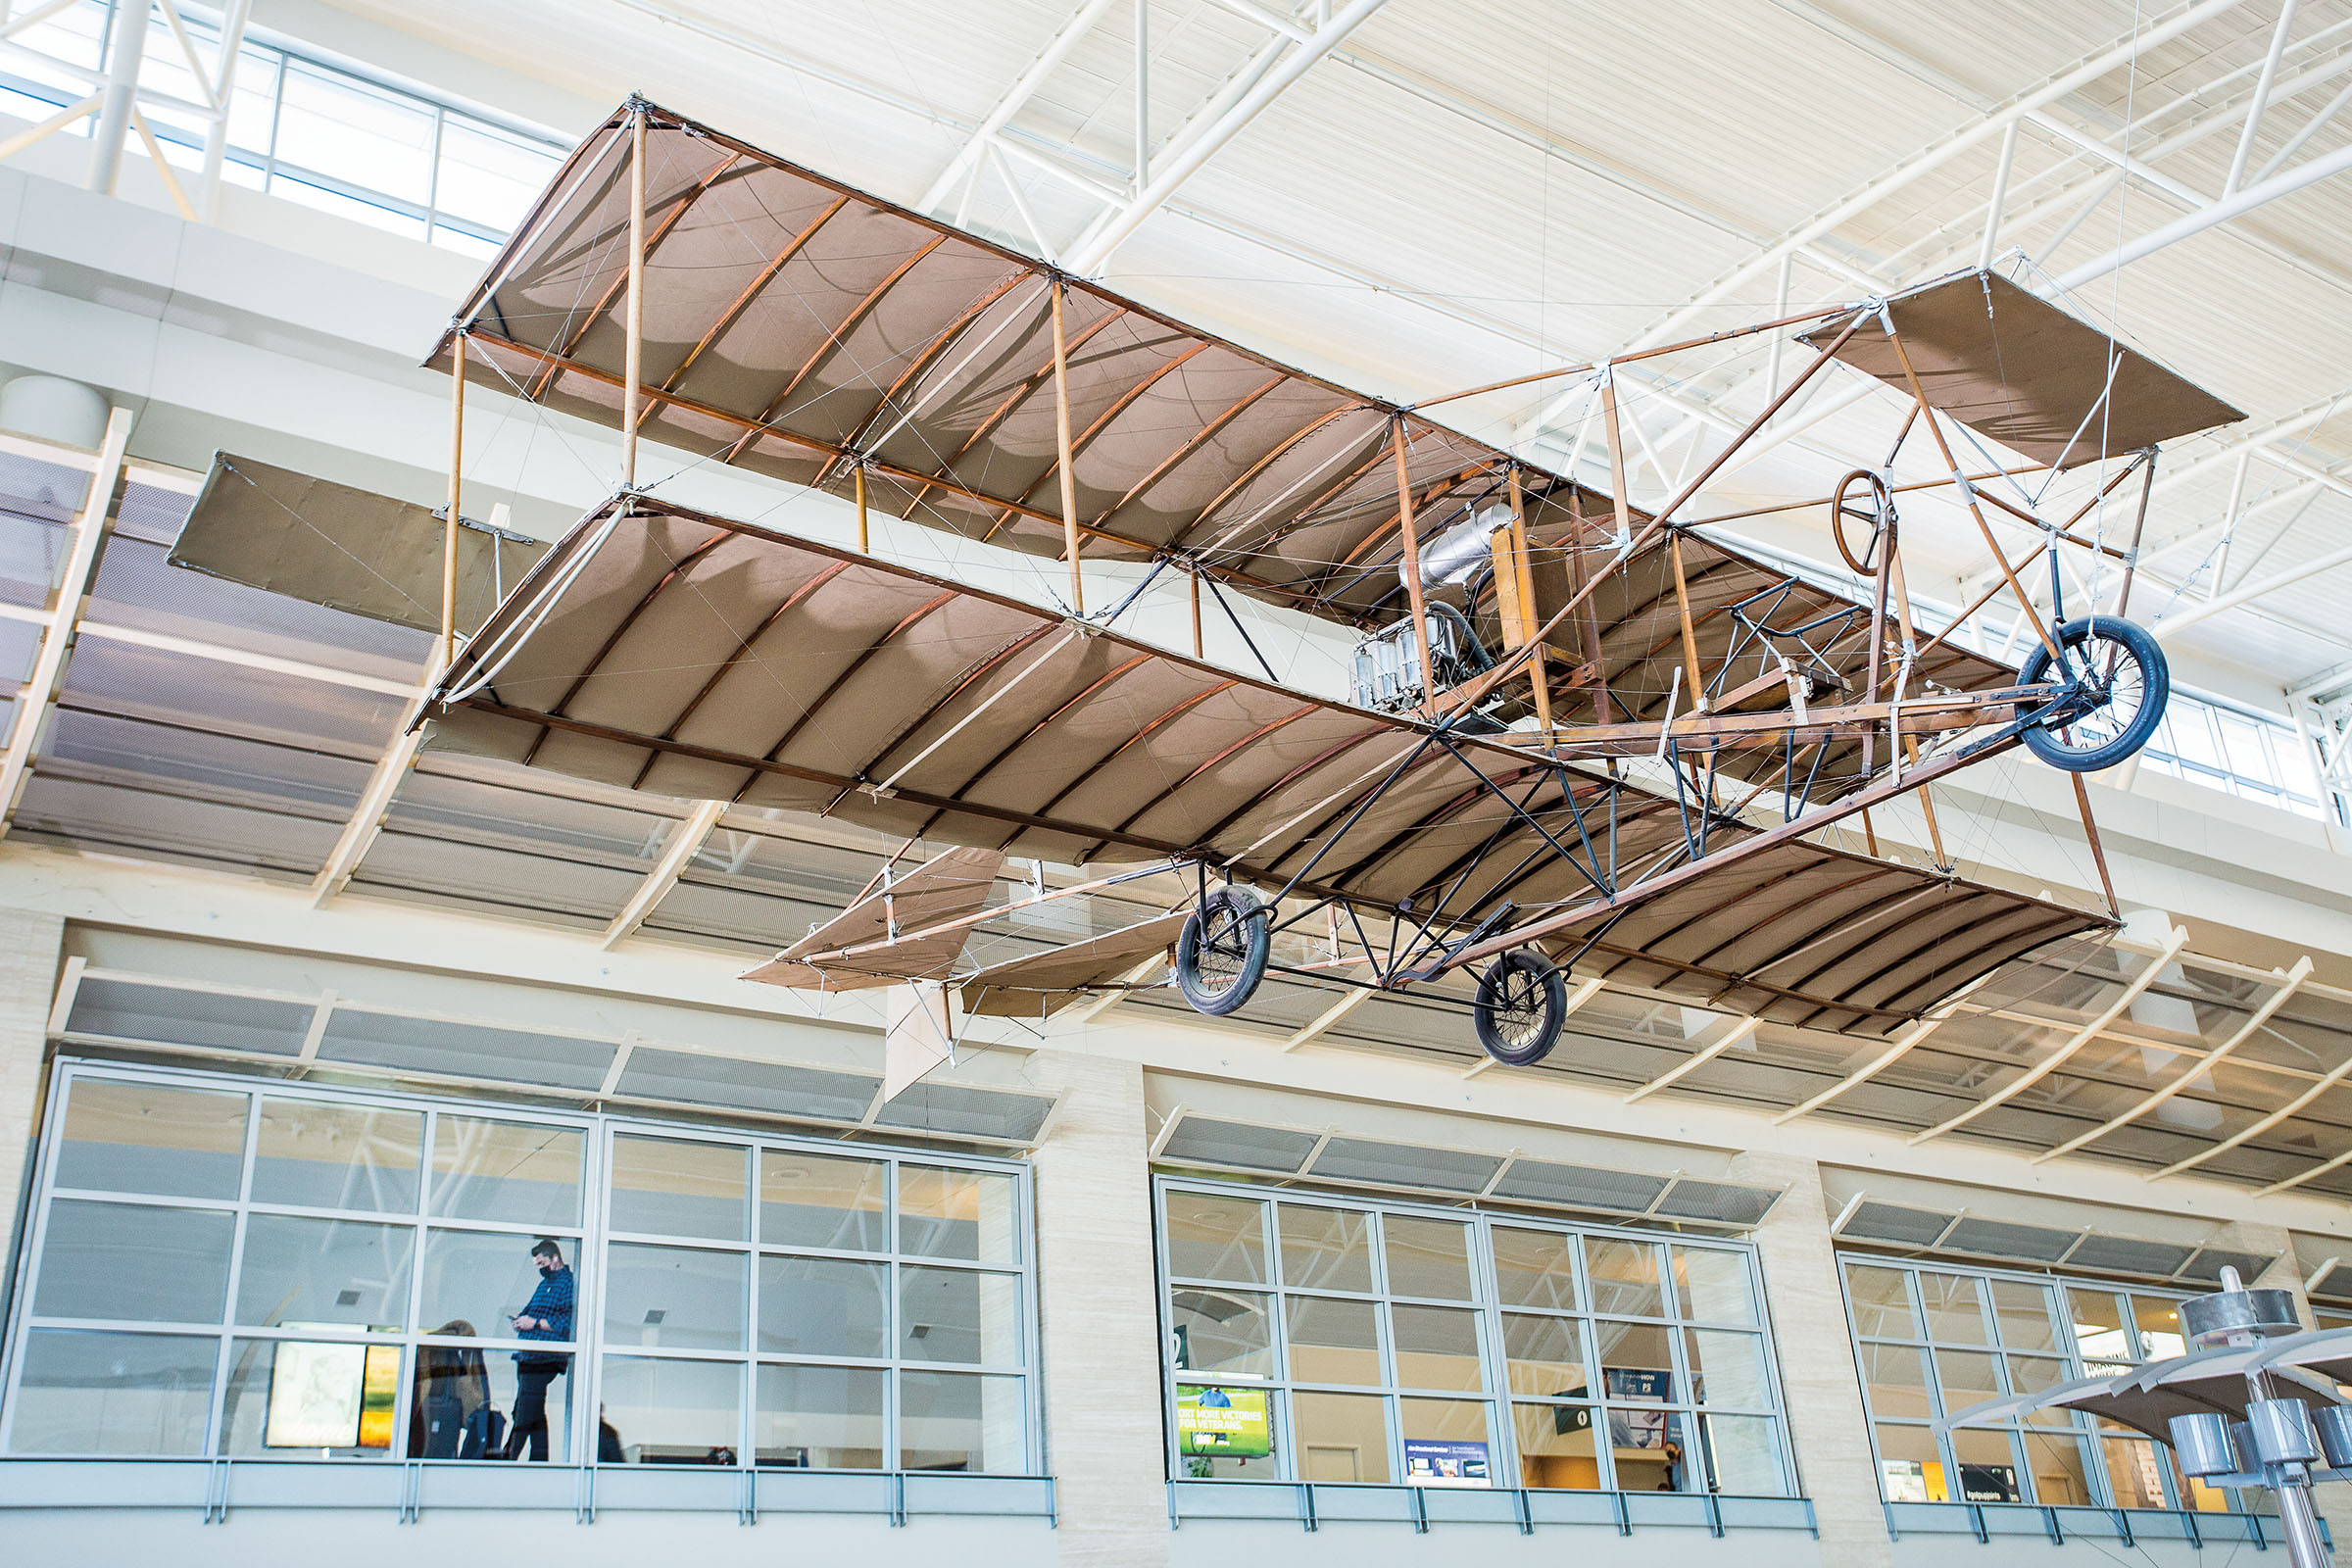 A picture of a tan wooden airplane hanging from the ceiling of a well-lit building